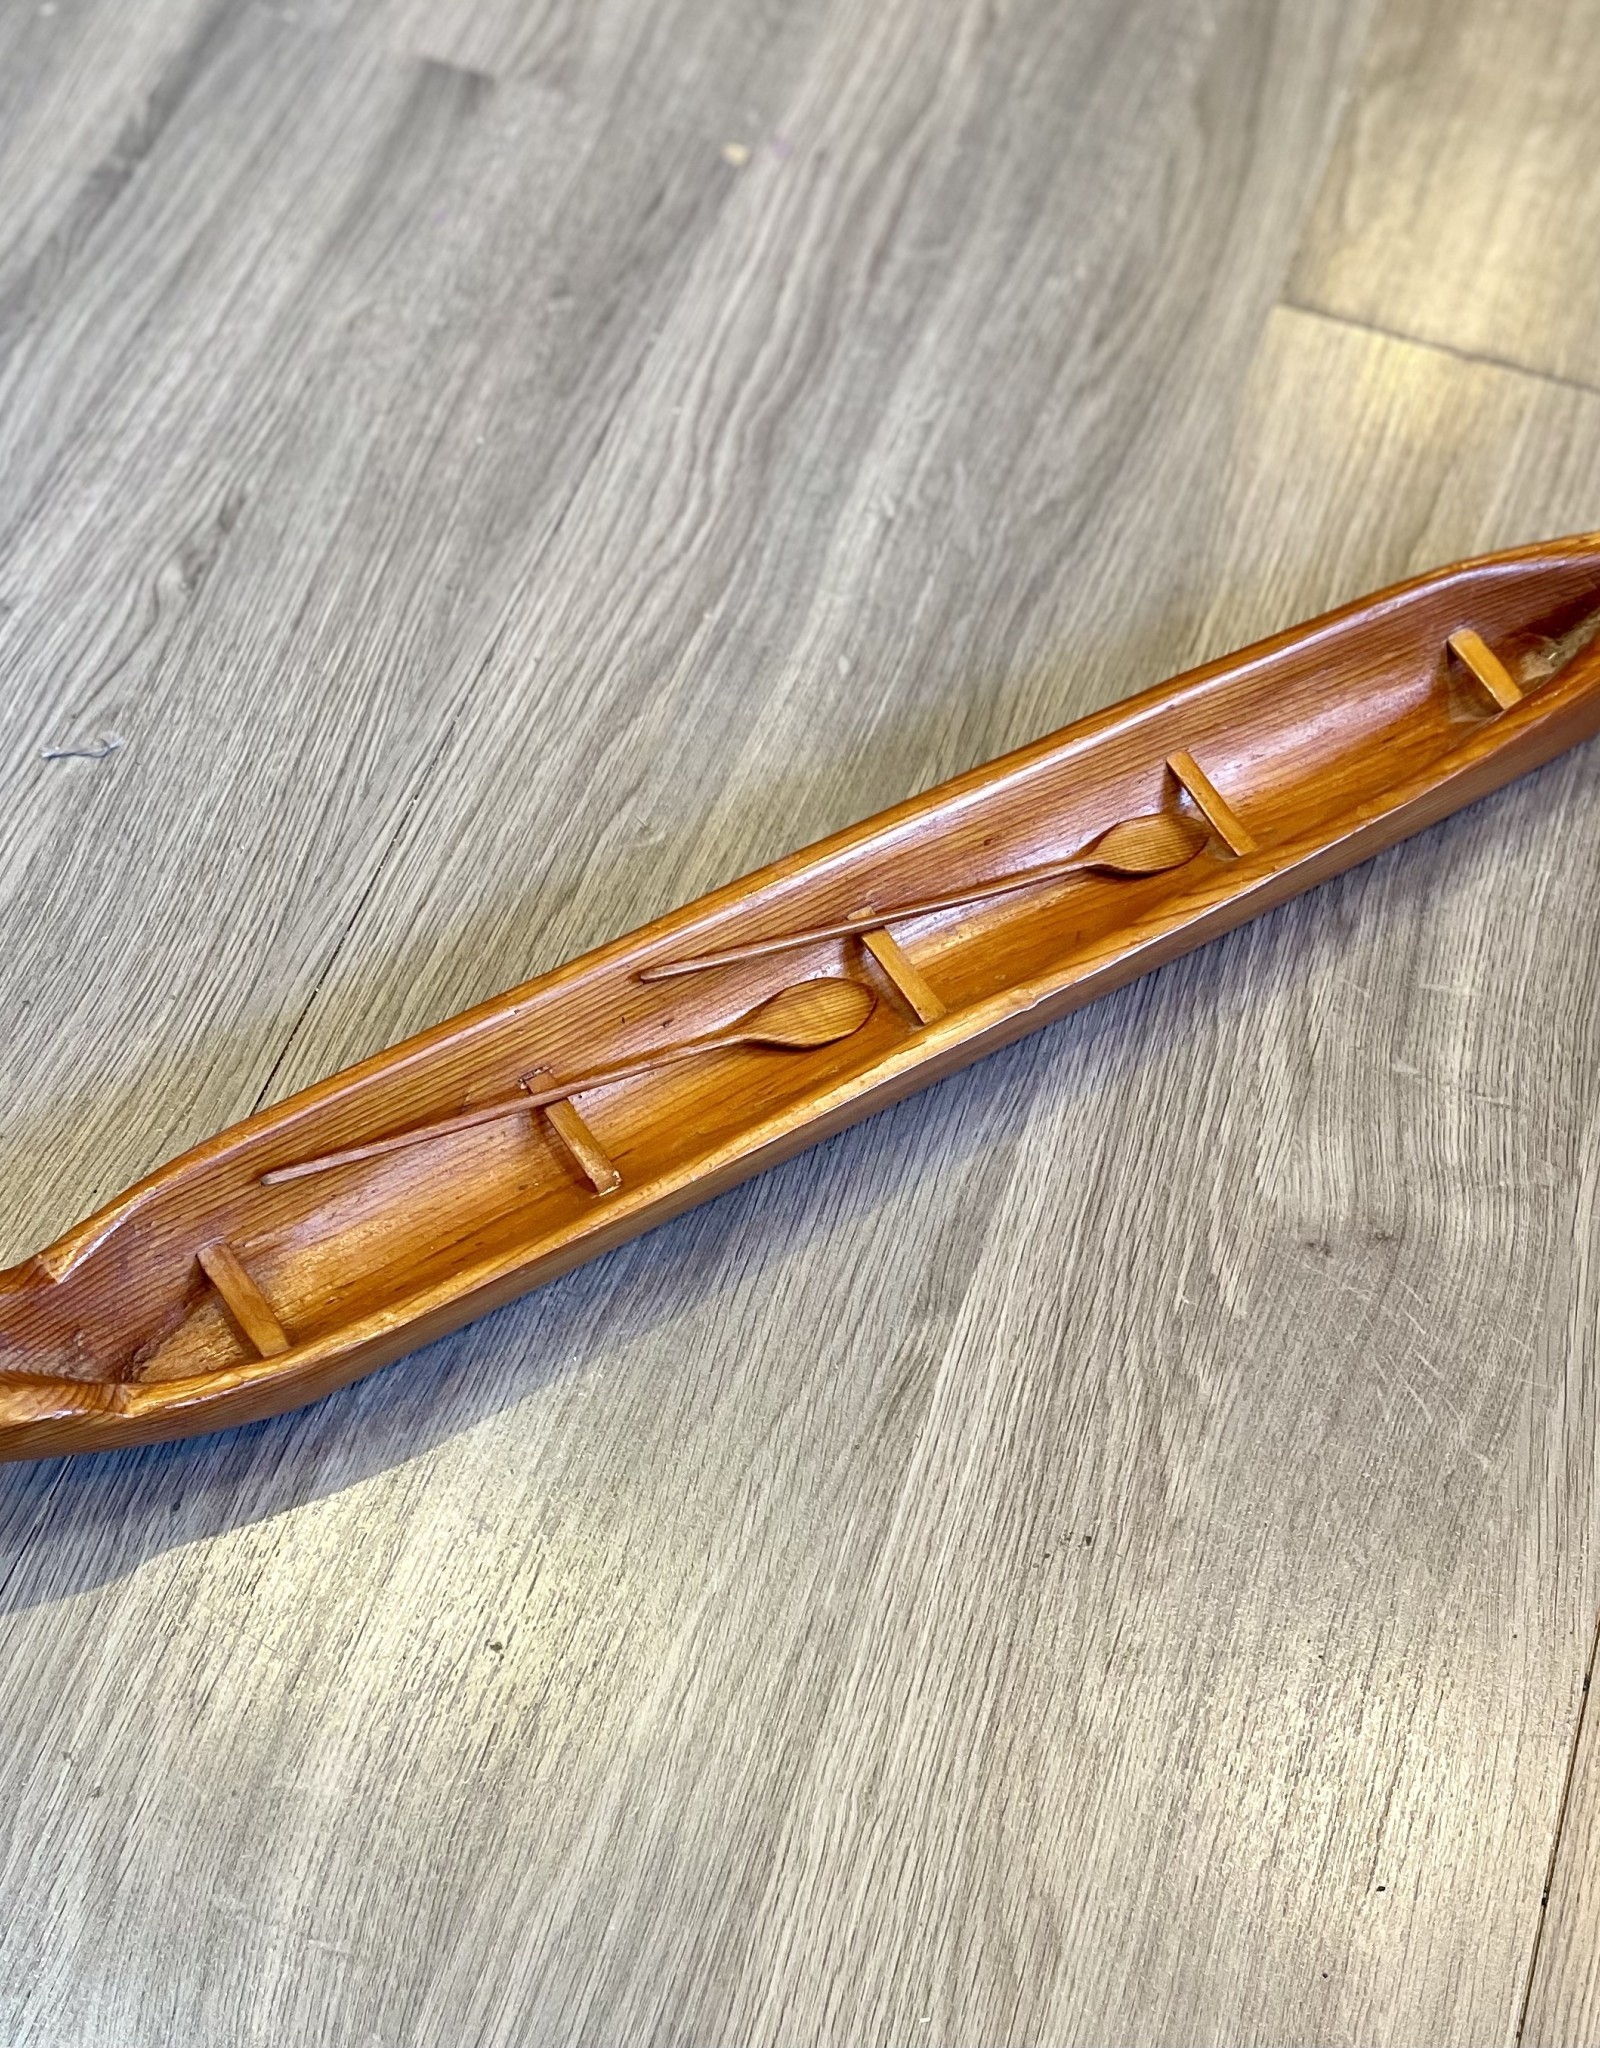 Aboriginal - Wooden Canoe Carving with two Paddles